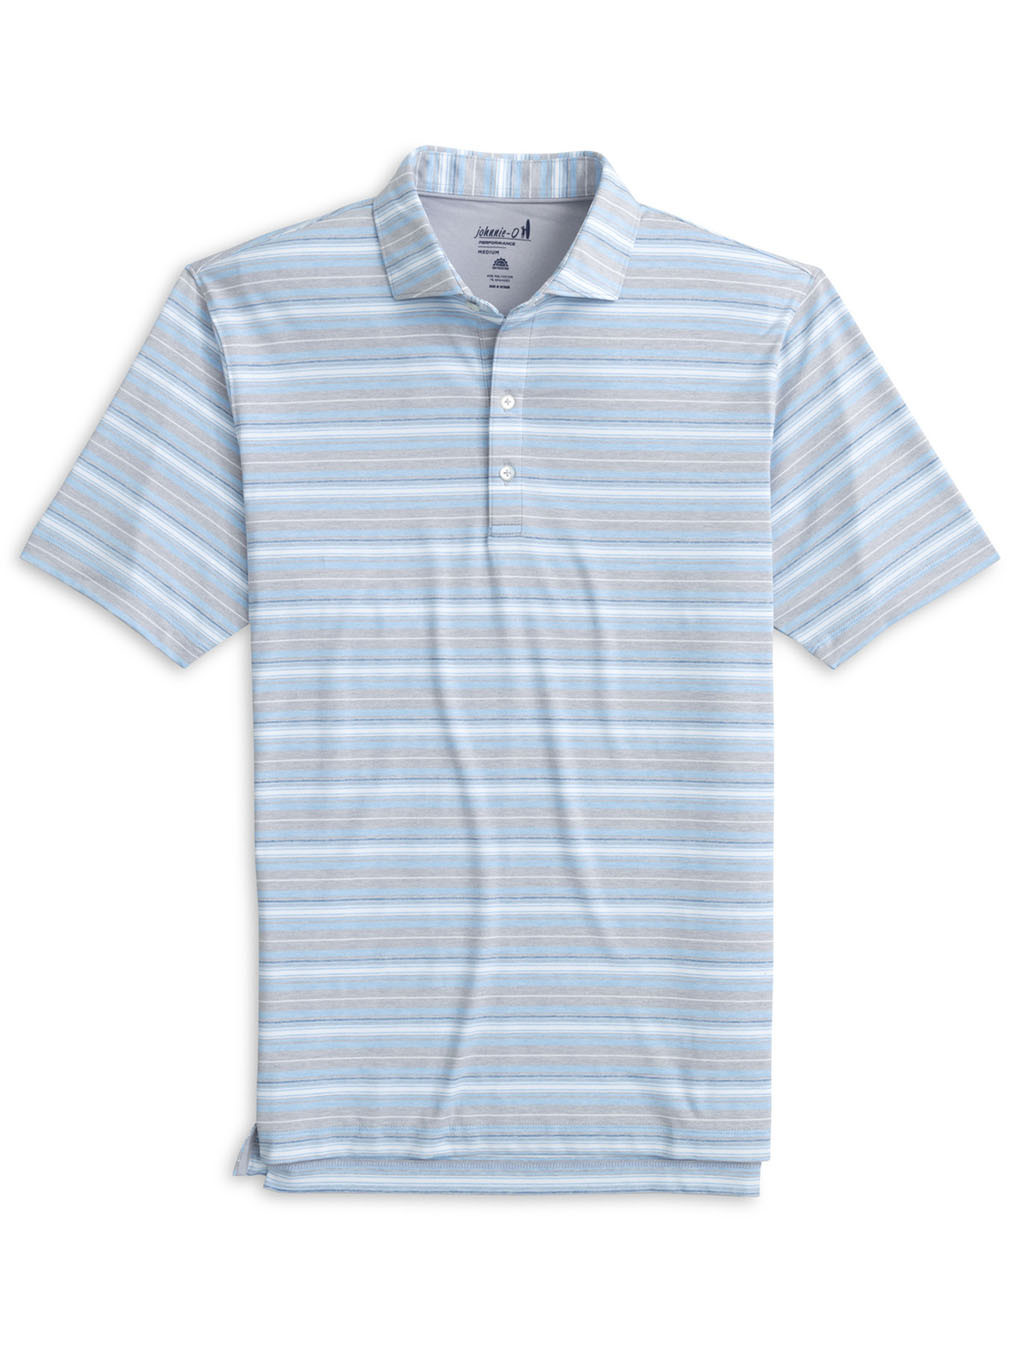 Coope Stripe Performance Polo Johnnie-O JMPO7640 Seal Grey